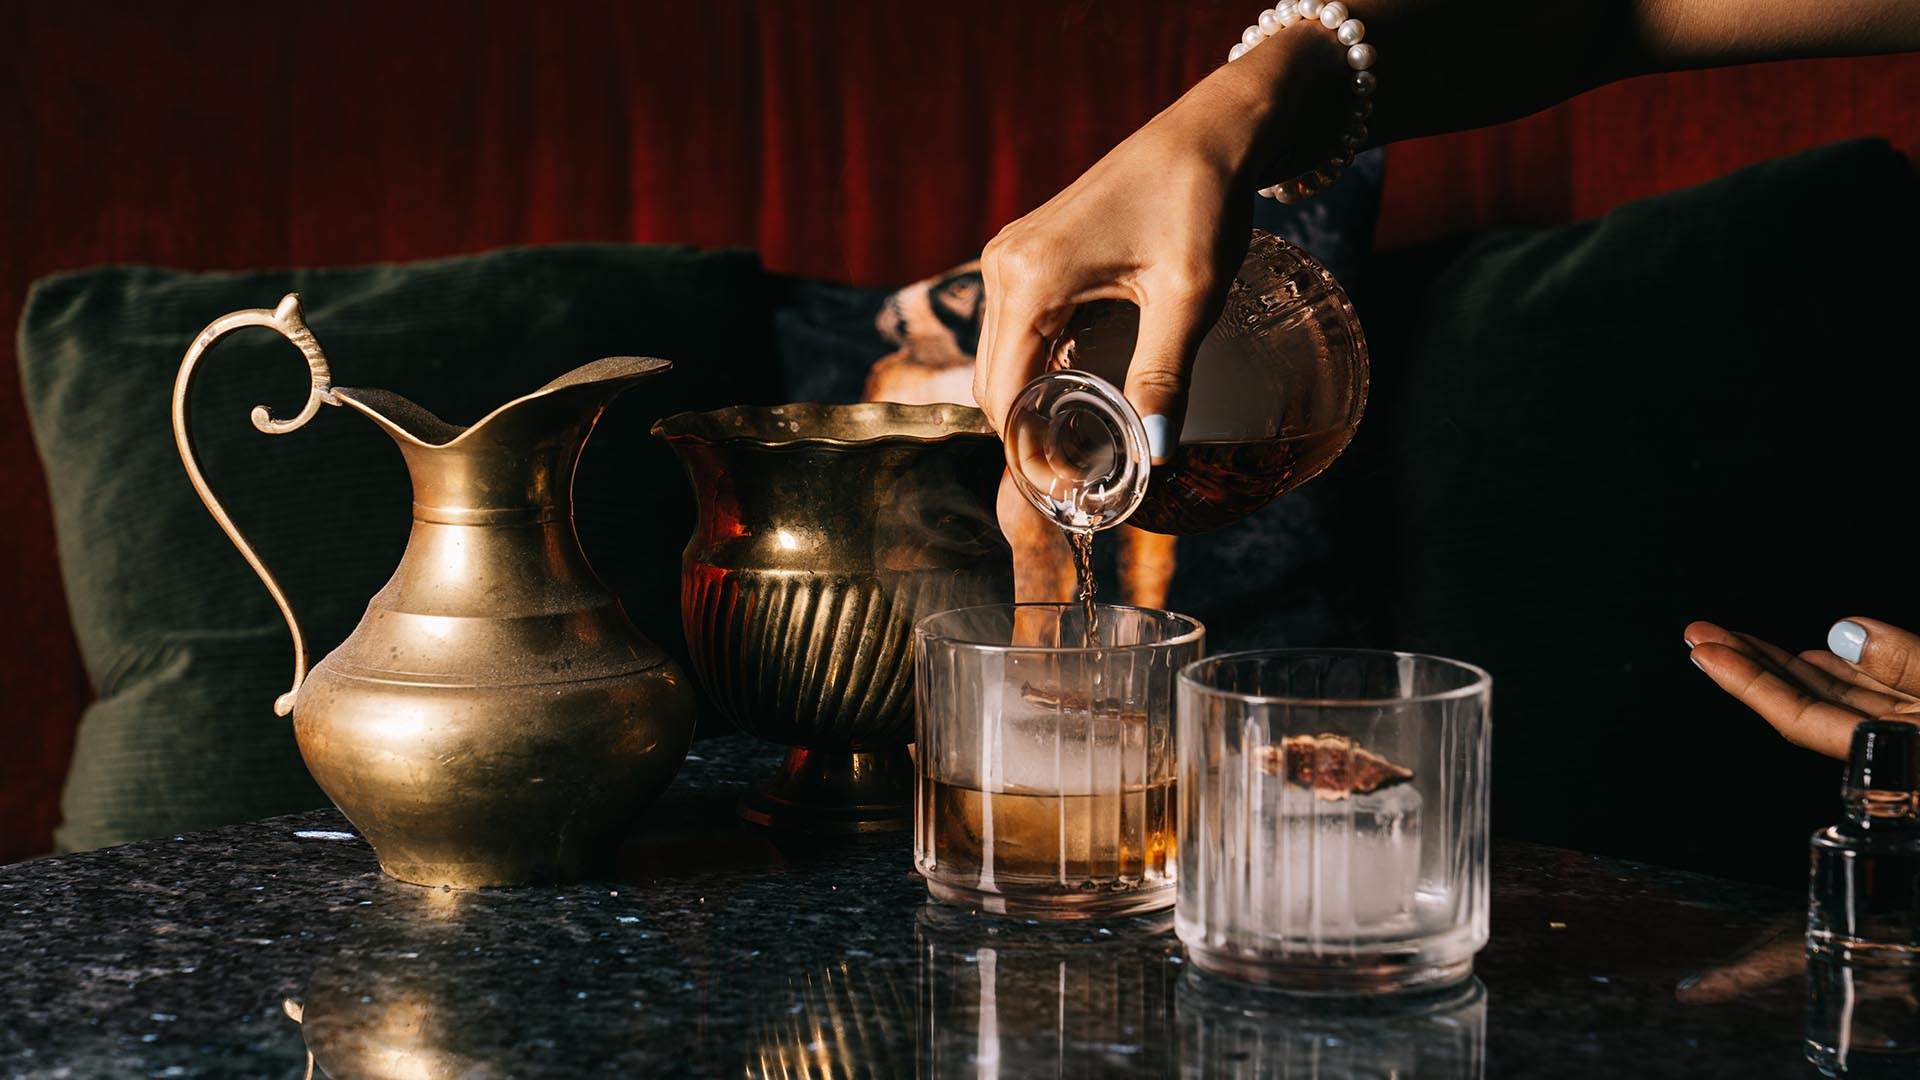 New Fortitude Valley Bar Kazba Is Serving One of Its Cocktails Out of a Flask Hidden in a Novel